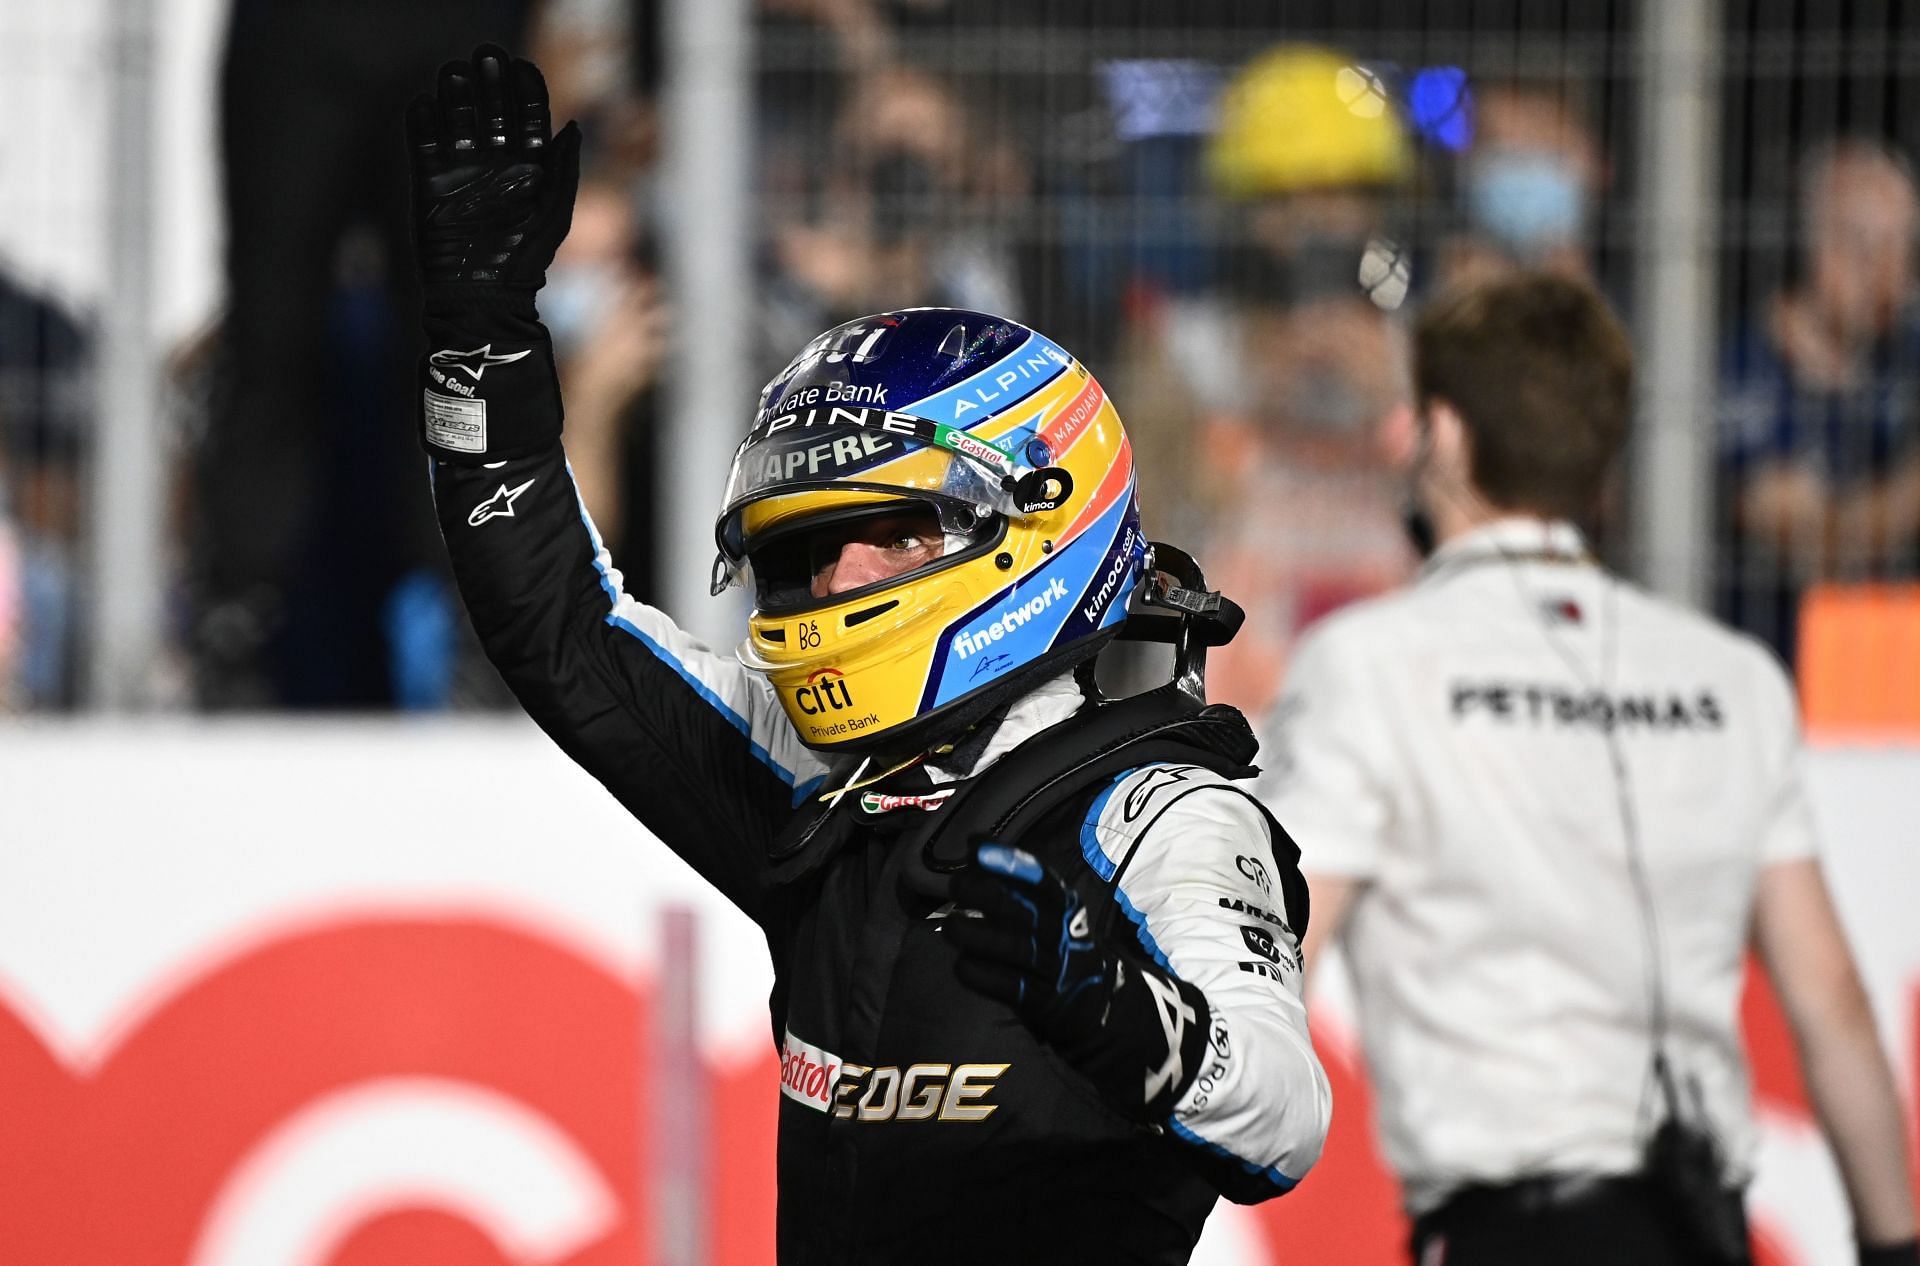 Fernando Alonso celebrates his podium in Qatar (Photo by Clive Mason/Getty Images)